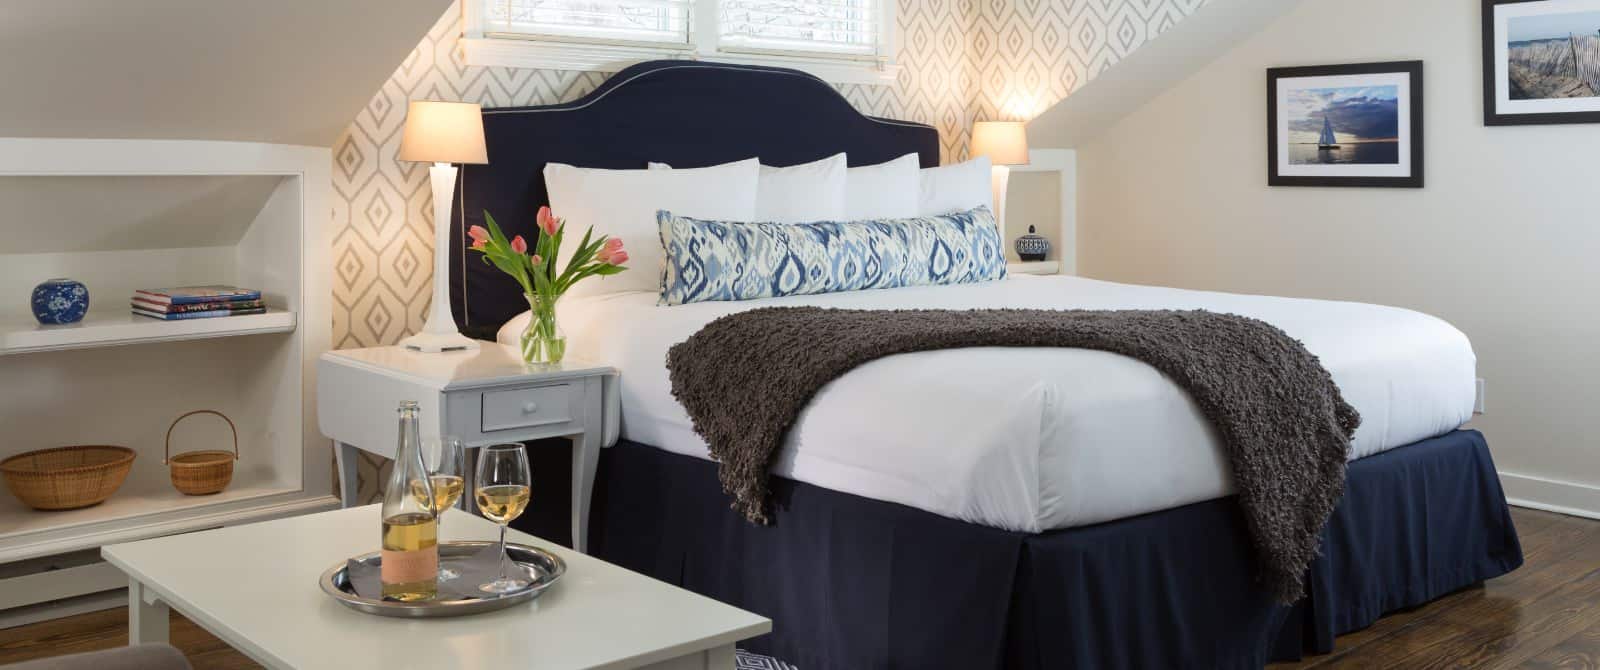 Bedroom with wooden flooring, light colored walls, navy upholstered headboard, white bedding, and sitting area